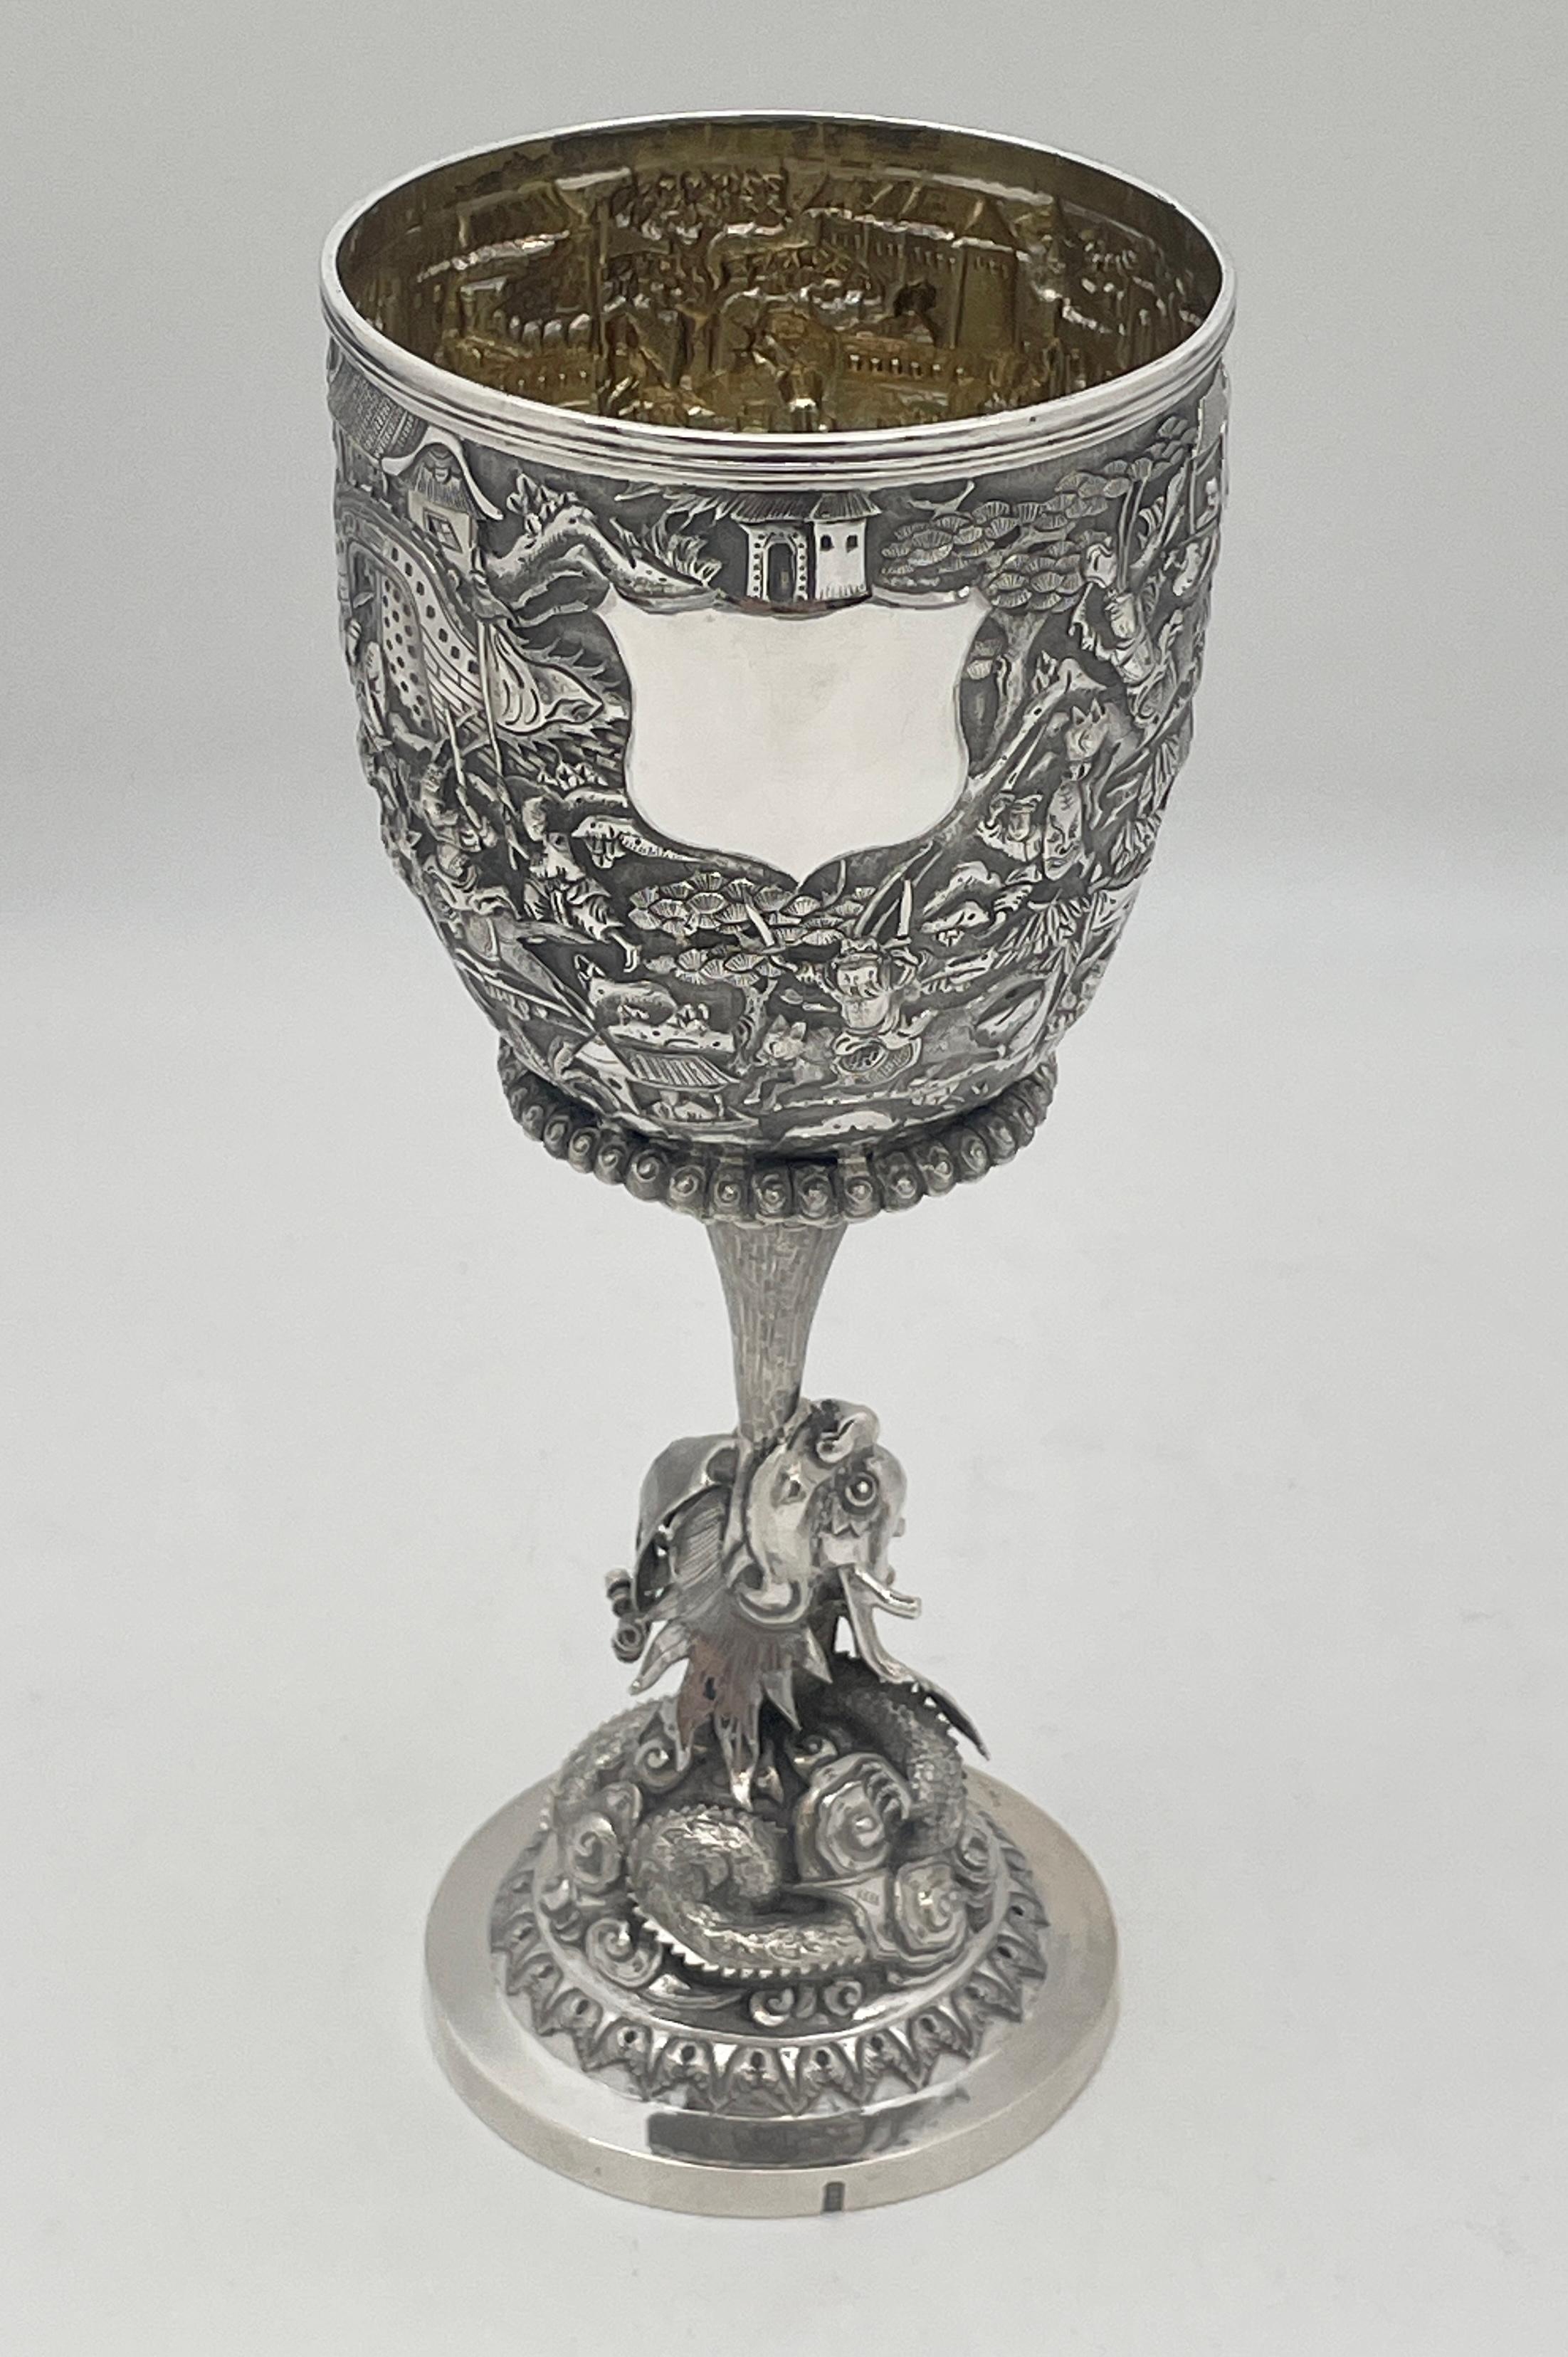 A rare Chinese Export Silver Goblet depicting the story of the Three Kingdoms. The goblet embossed and chased with characters from the Romance of the Three Kingdoms, including Zhuge Liang, Liu Bei, Guan Yu, Zhang Fei, etc. It has a vacant